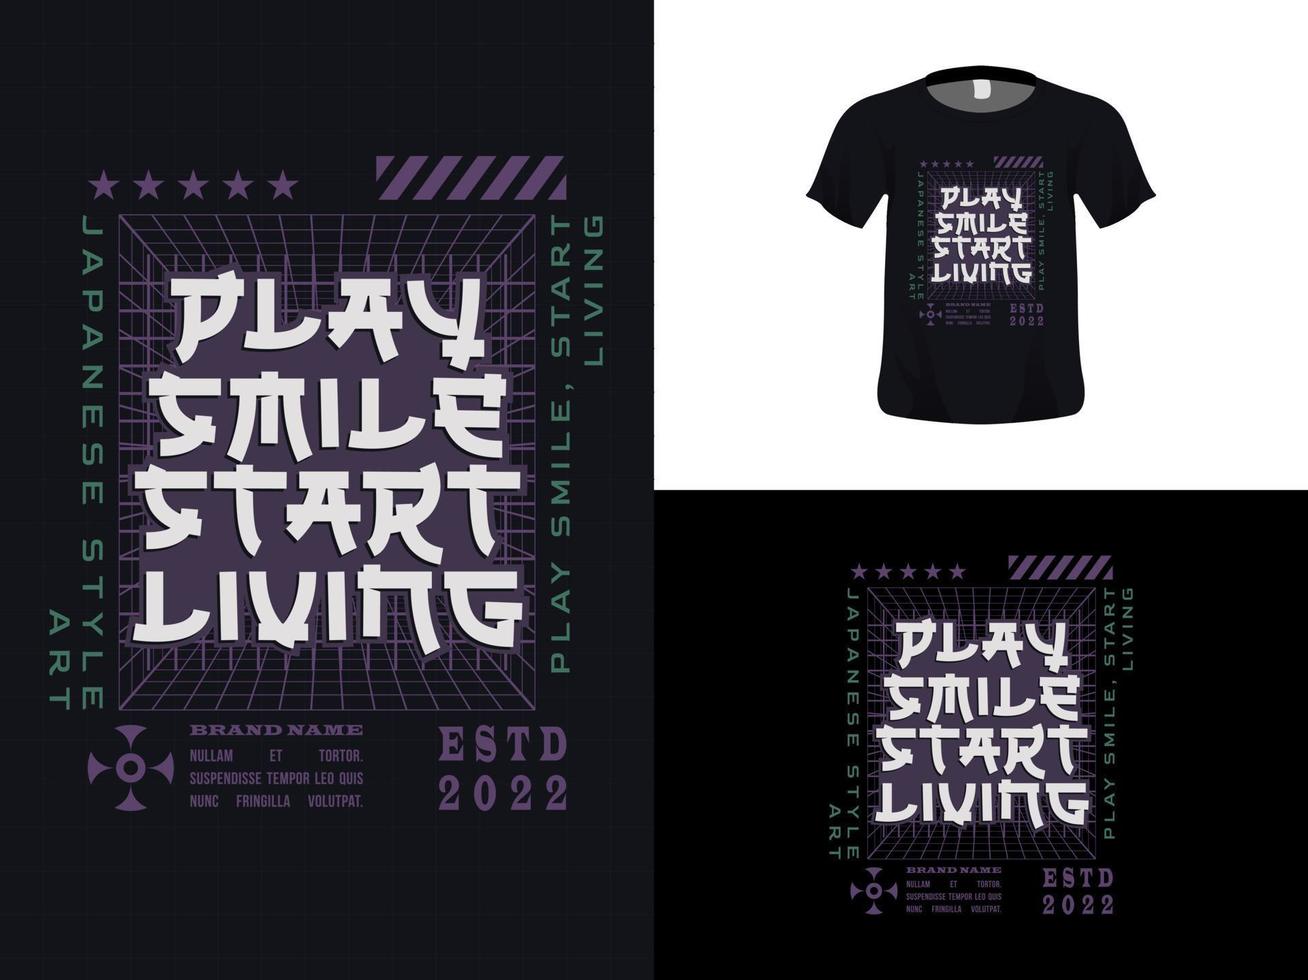 Tshirt typography quote design, Play Smile Start Living for print. Poster template, Premium Vector. vector